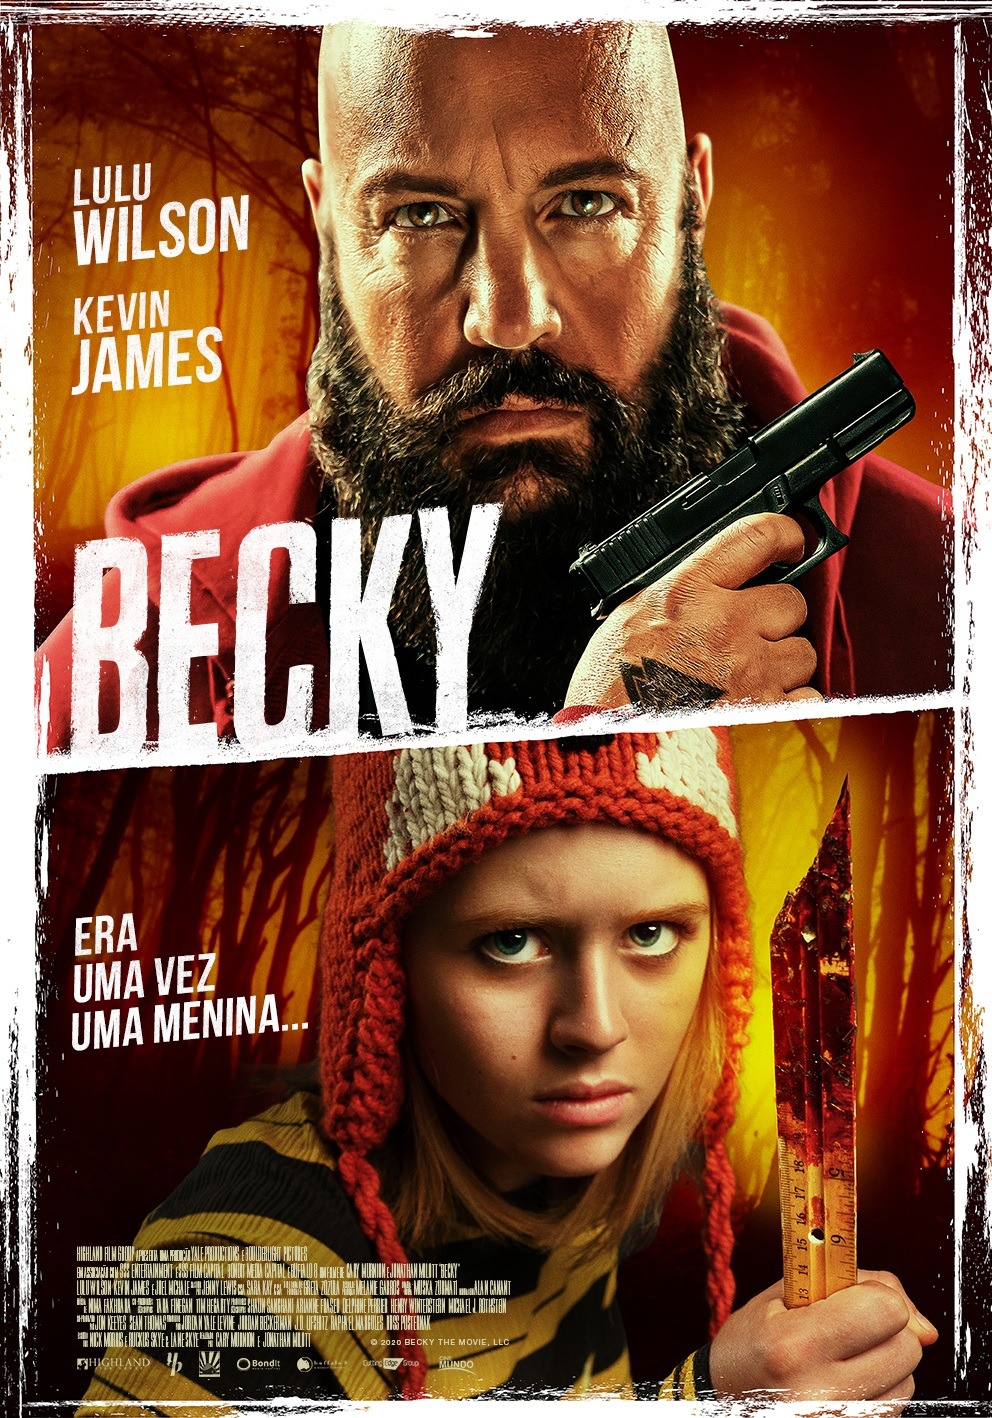 Extra Large Movie Poster Image for Becky (#5 of 5)